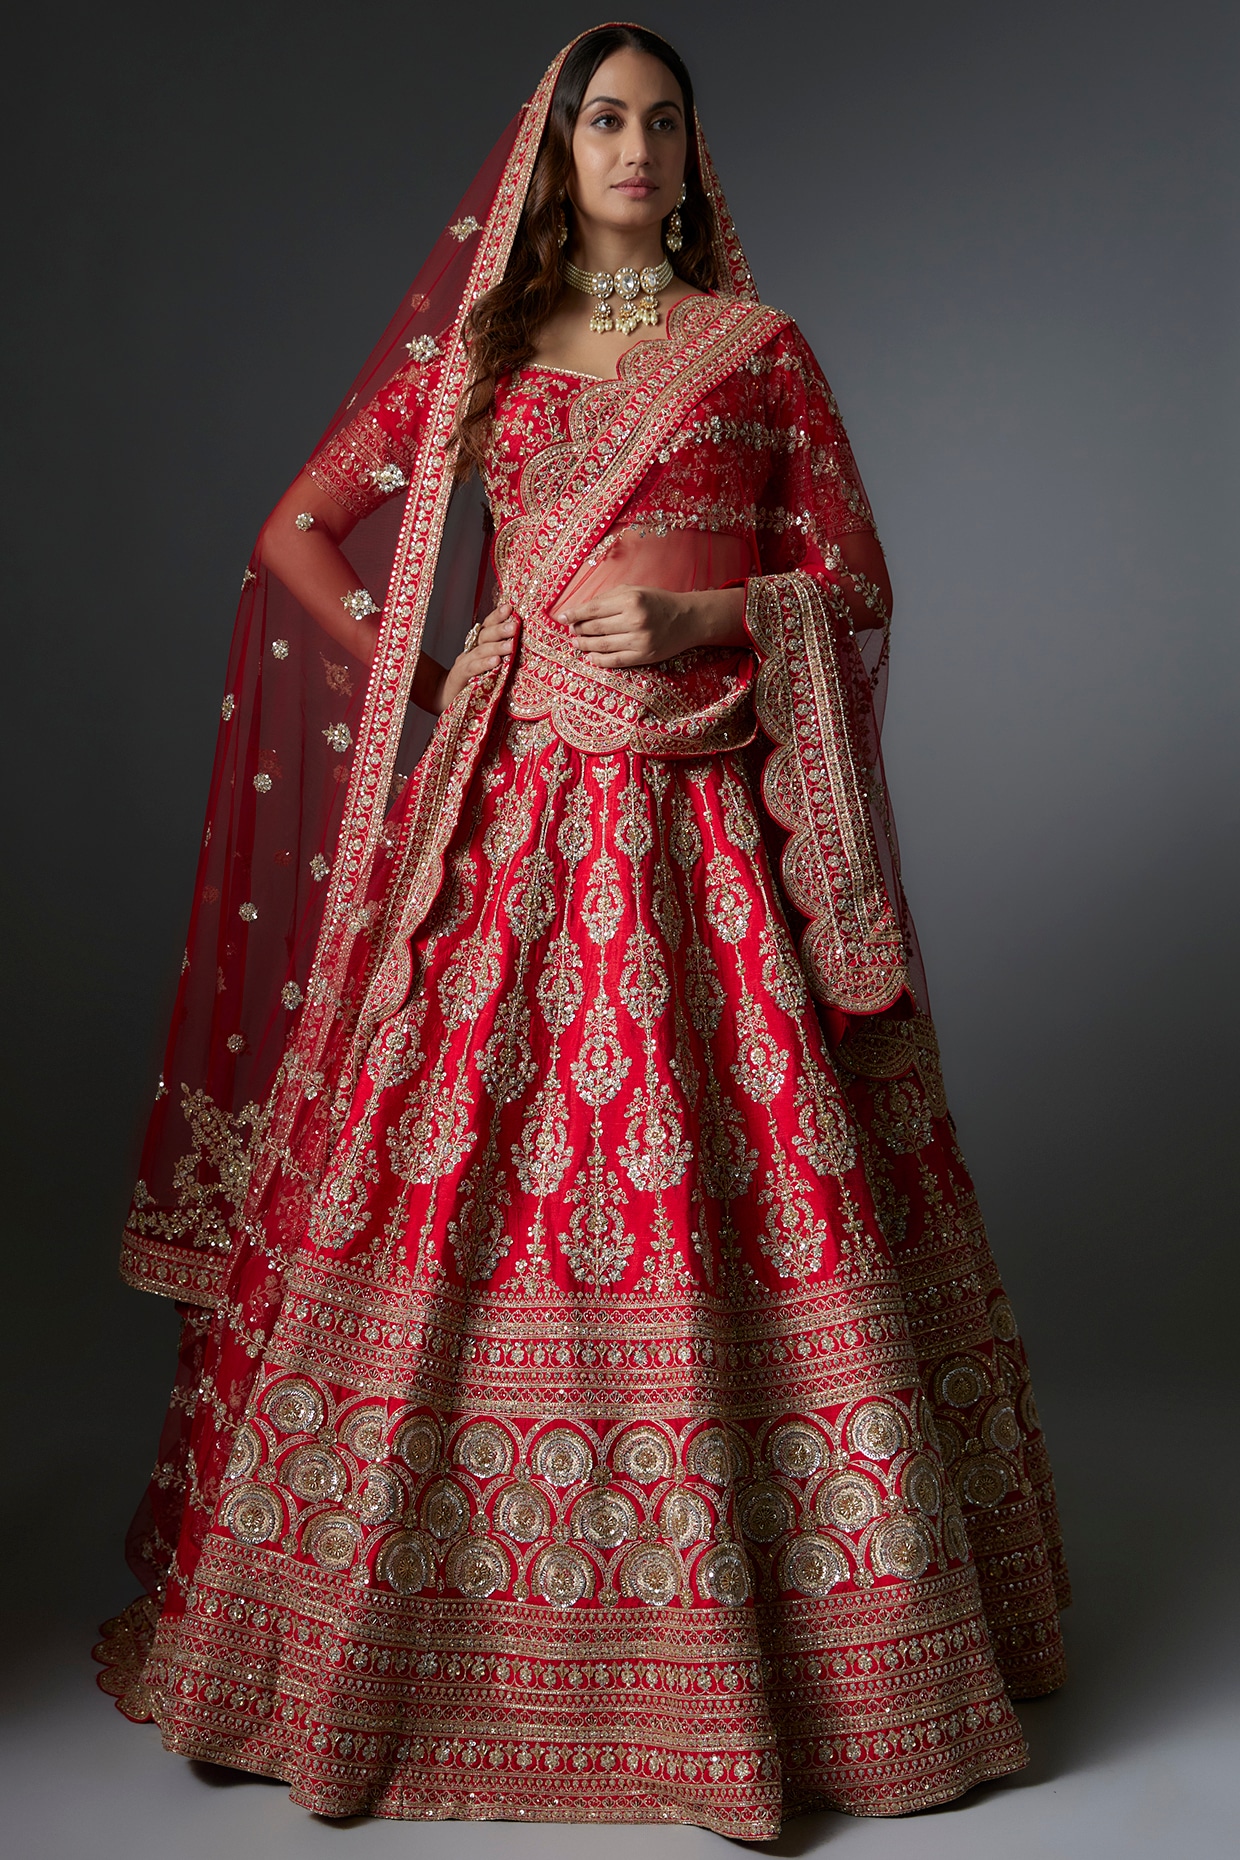 Navratana the Collection . - Sanjana Studio Best Bridal & Lehenga Showroom  in Aligarh. . Stylish Collection of Bridal Lehengas, Wedding Sarees, Garara  Sets, Fancy Suits, Party Gowns, and Other Fancy Dresses. #